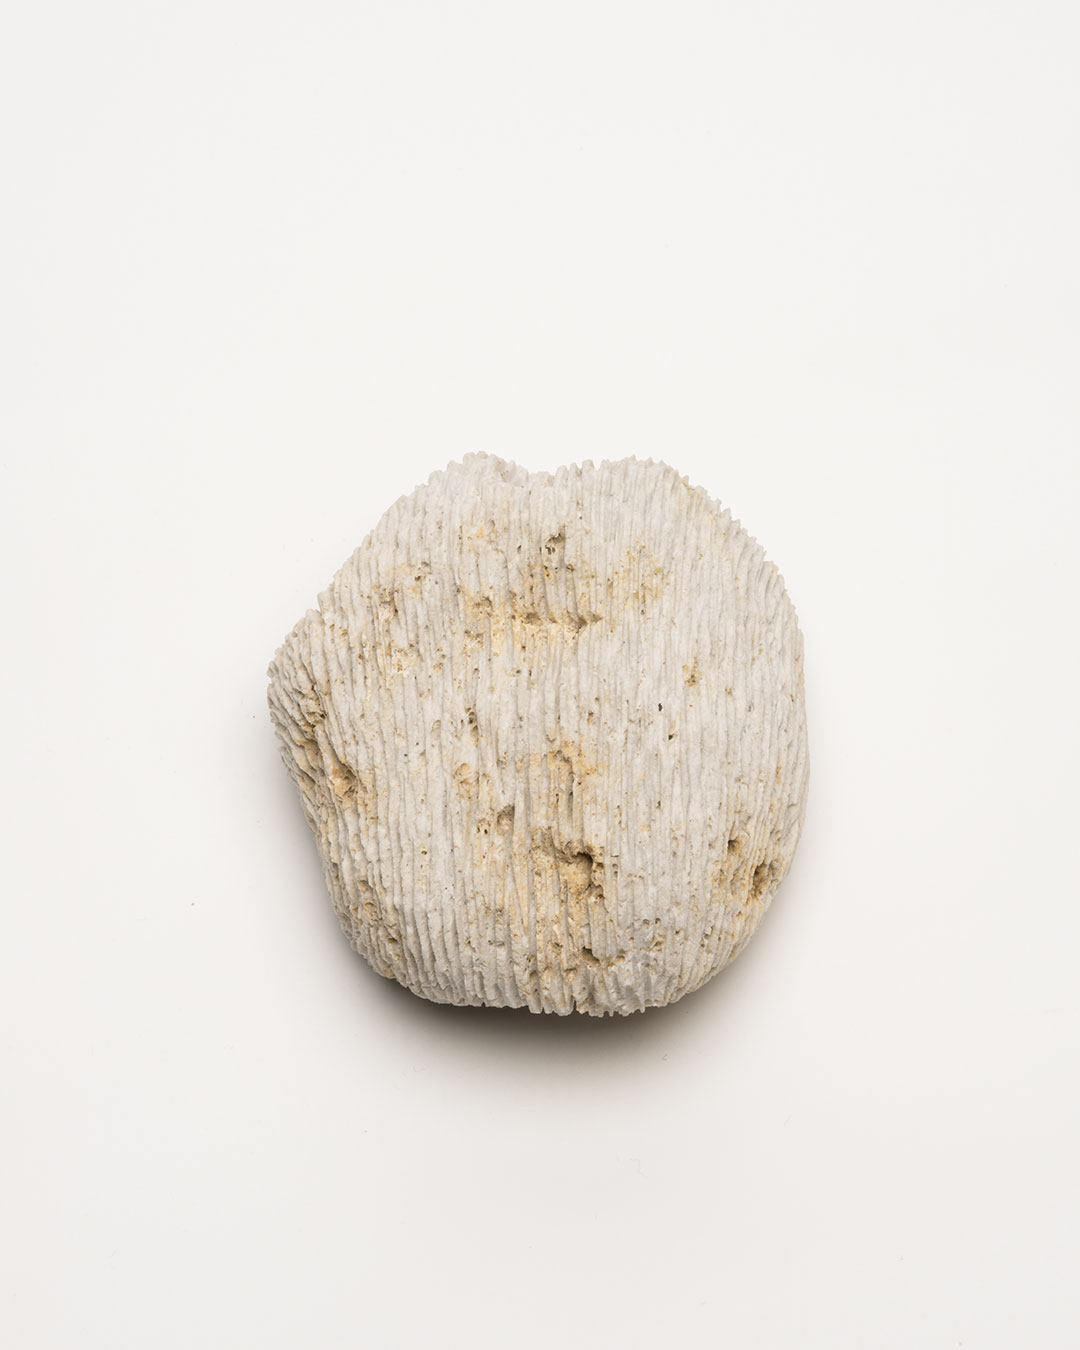 Vivi Touloumidi, What Will the Cosmos Say 2013, brooch; pumice stone, steel, 100 x 70 x 50 mm, €280 (image: front)